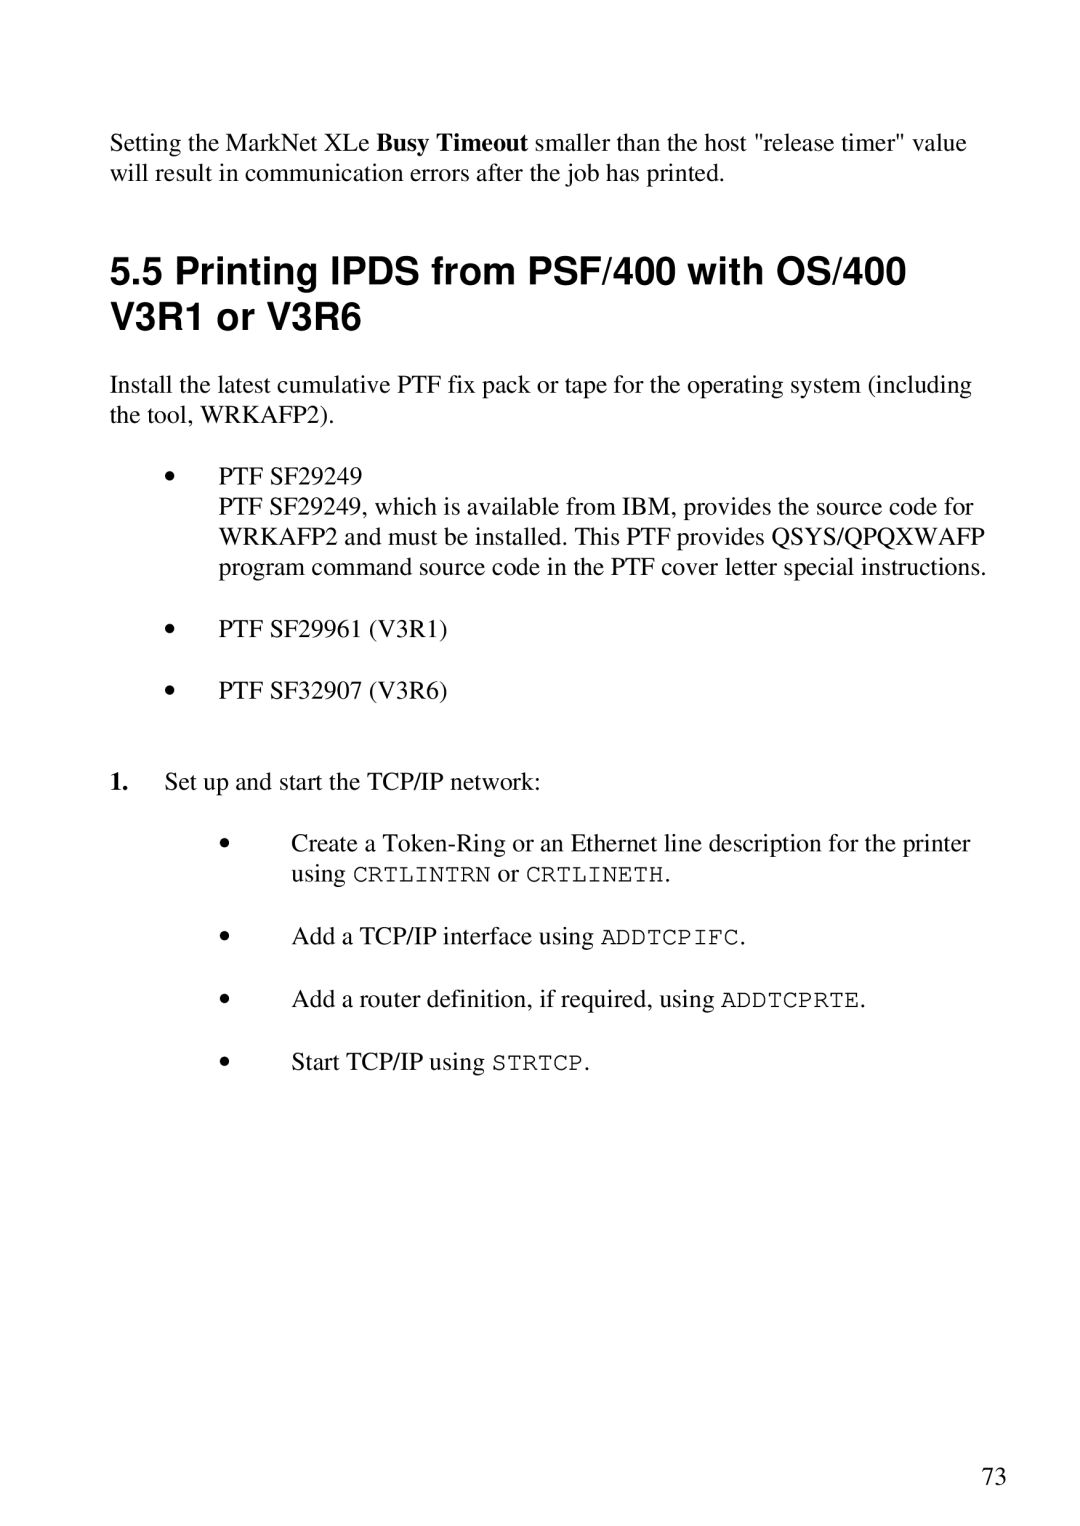 Lexmark Se 3455, K 1220 manual Printing Ipds from PSF/400 with OS/400 V3R1 or V3R6 